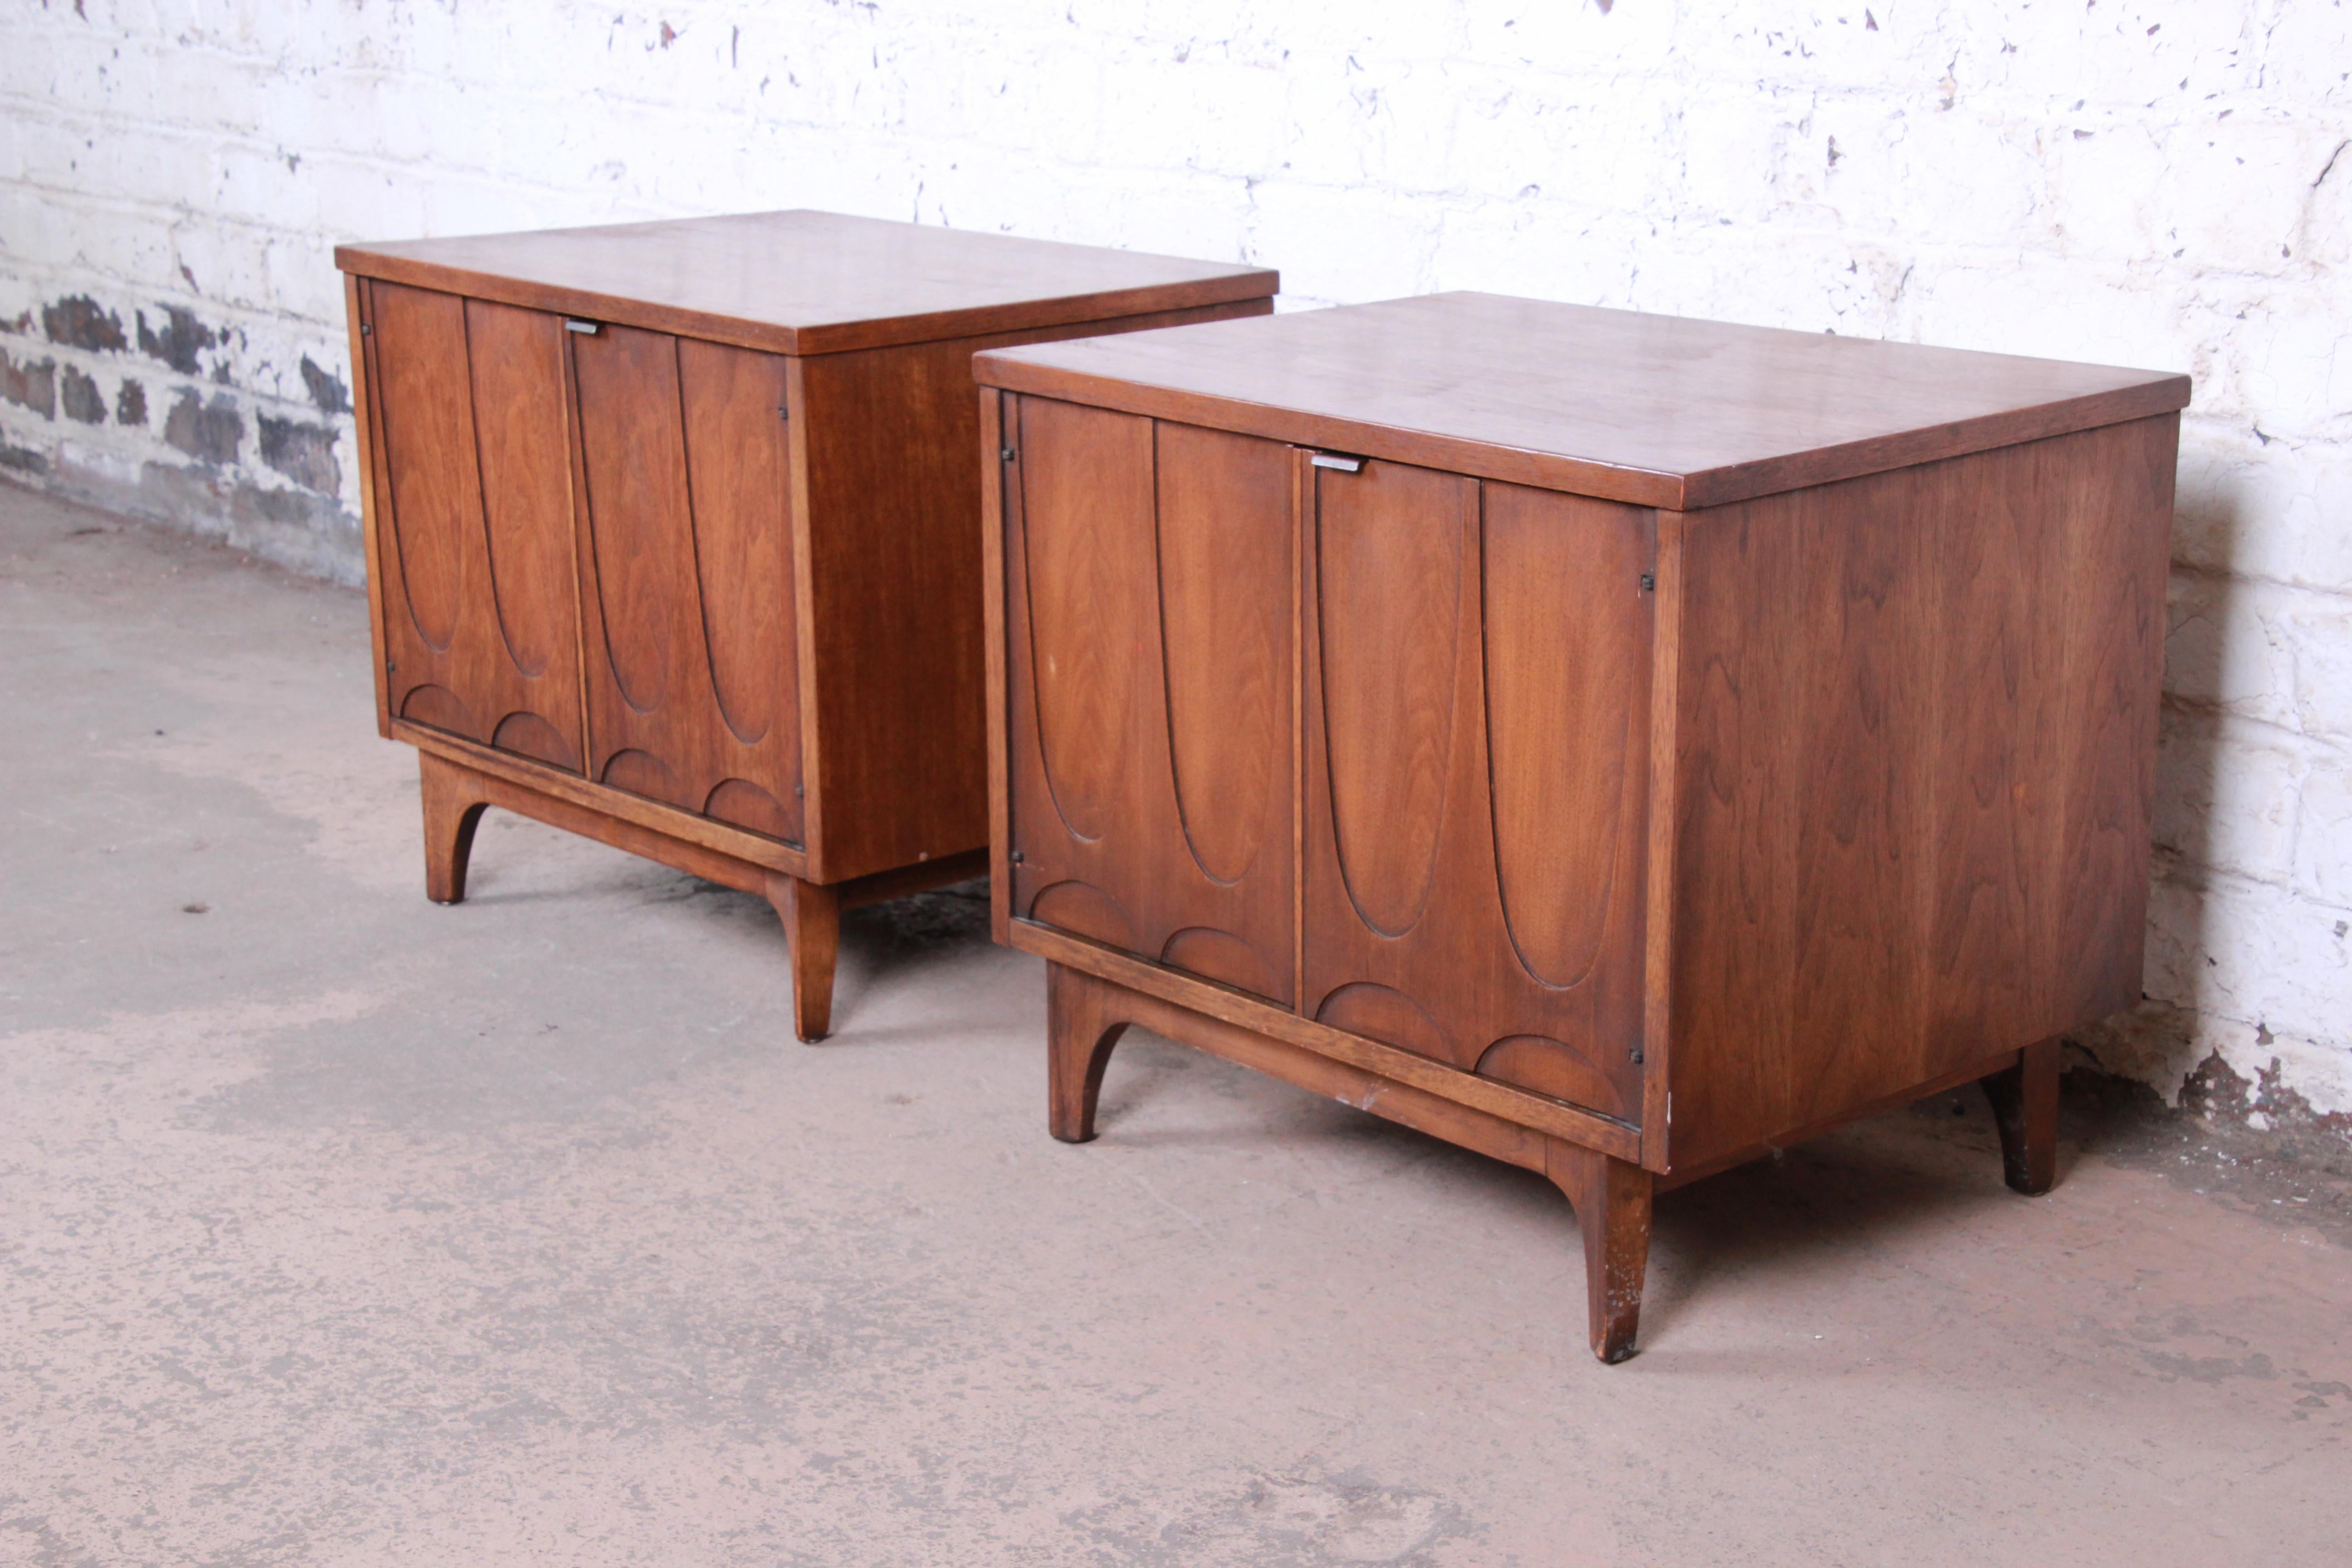 A stunning pair of Mid-Century Modern sculpted walnut nightstands or side tables by Broyhill Brasilia. The nightstands feature beautiful walnut wood grain and an iconic sculpted arch design. They offer good storage, each with an open cabinet space